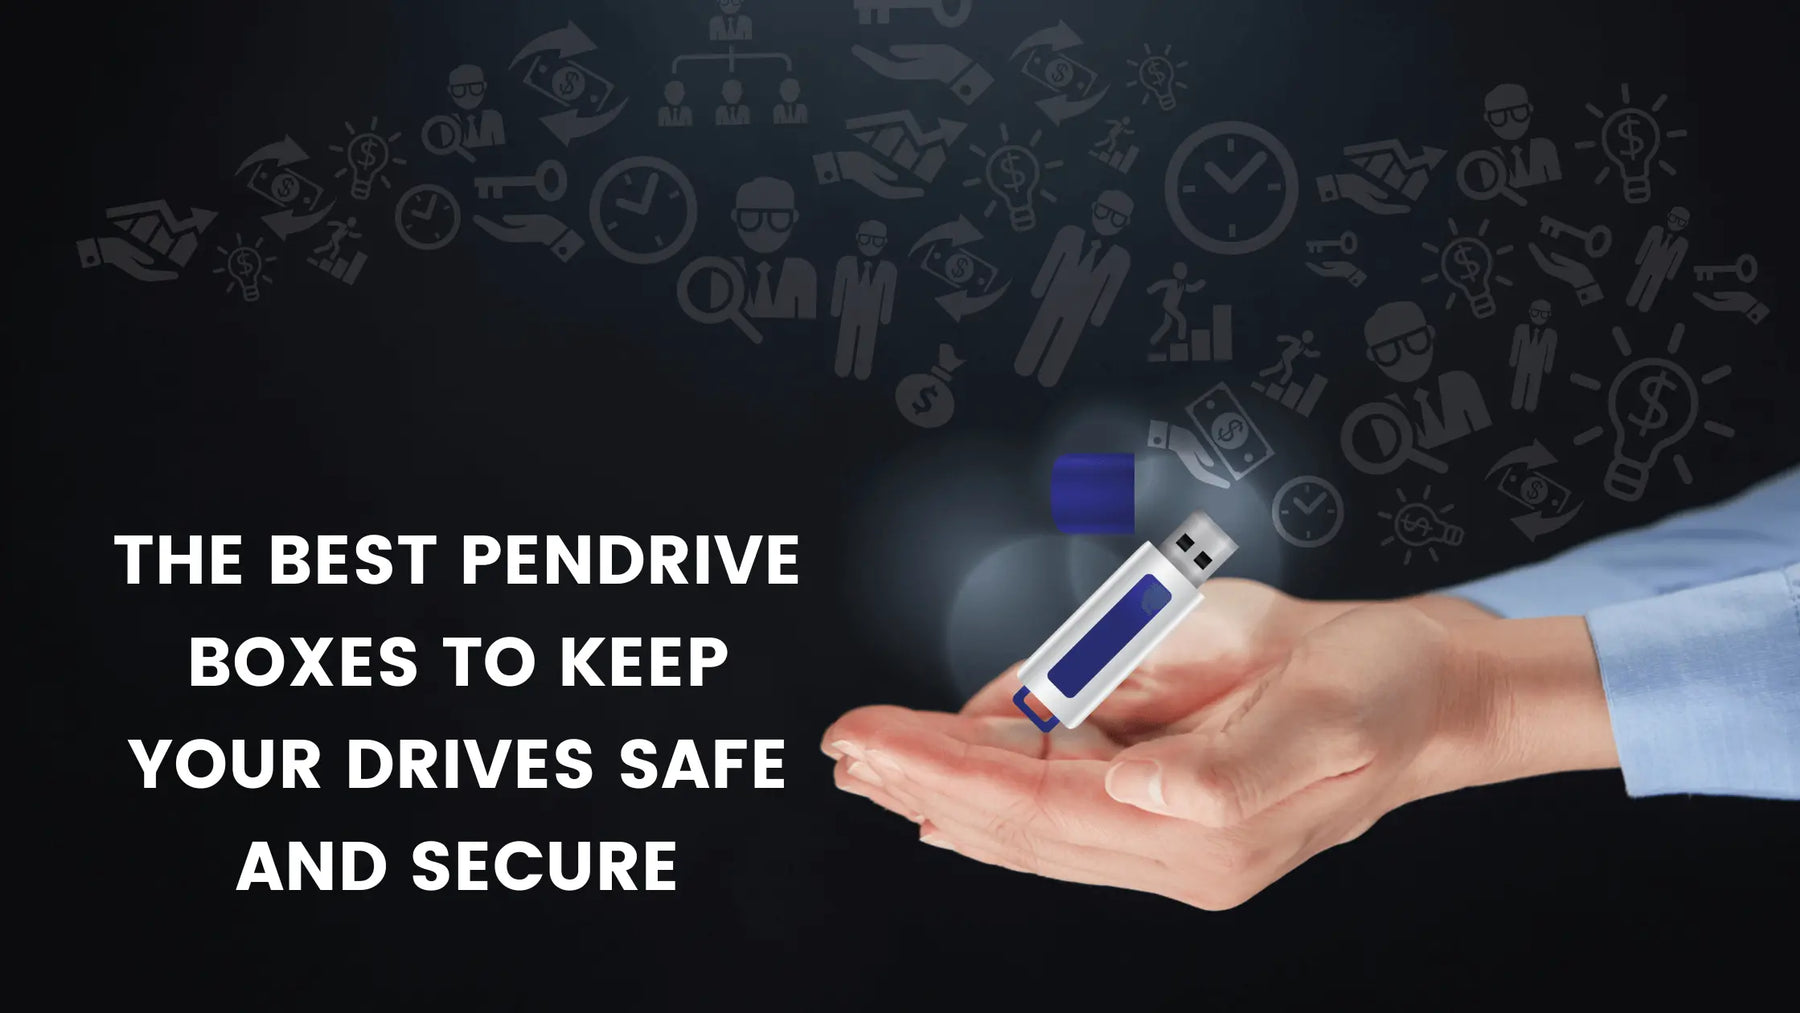 The Best Pendrive Boxes to Keep Your Drives Safe and Secure